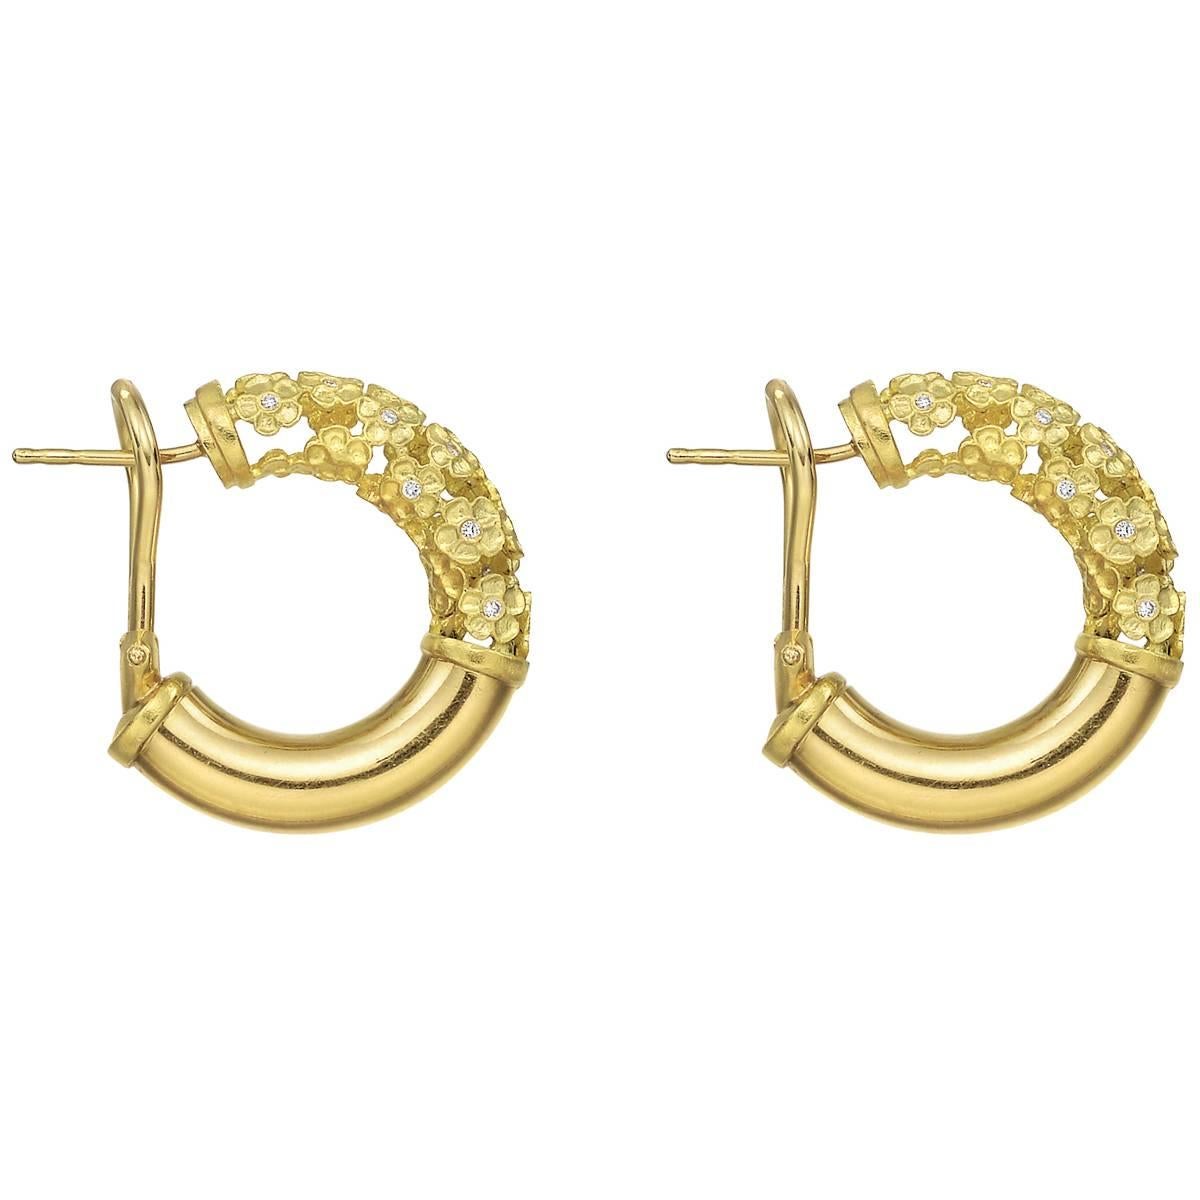 "Flower Tube" hoop earrings, designed as a tube of openwork flowers with diamond centers, in 18k yellow gold, signed Paul Morelli. 30 diamond accents weighing approximately 0.10 total carats. Post and Omega-clip backs.
0.94" (24mm)